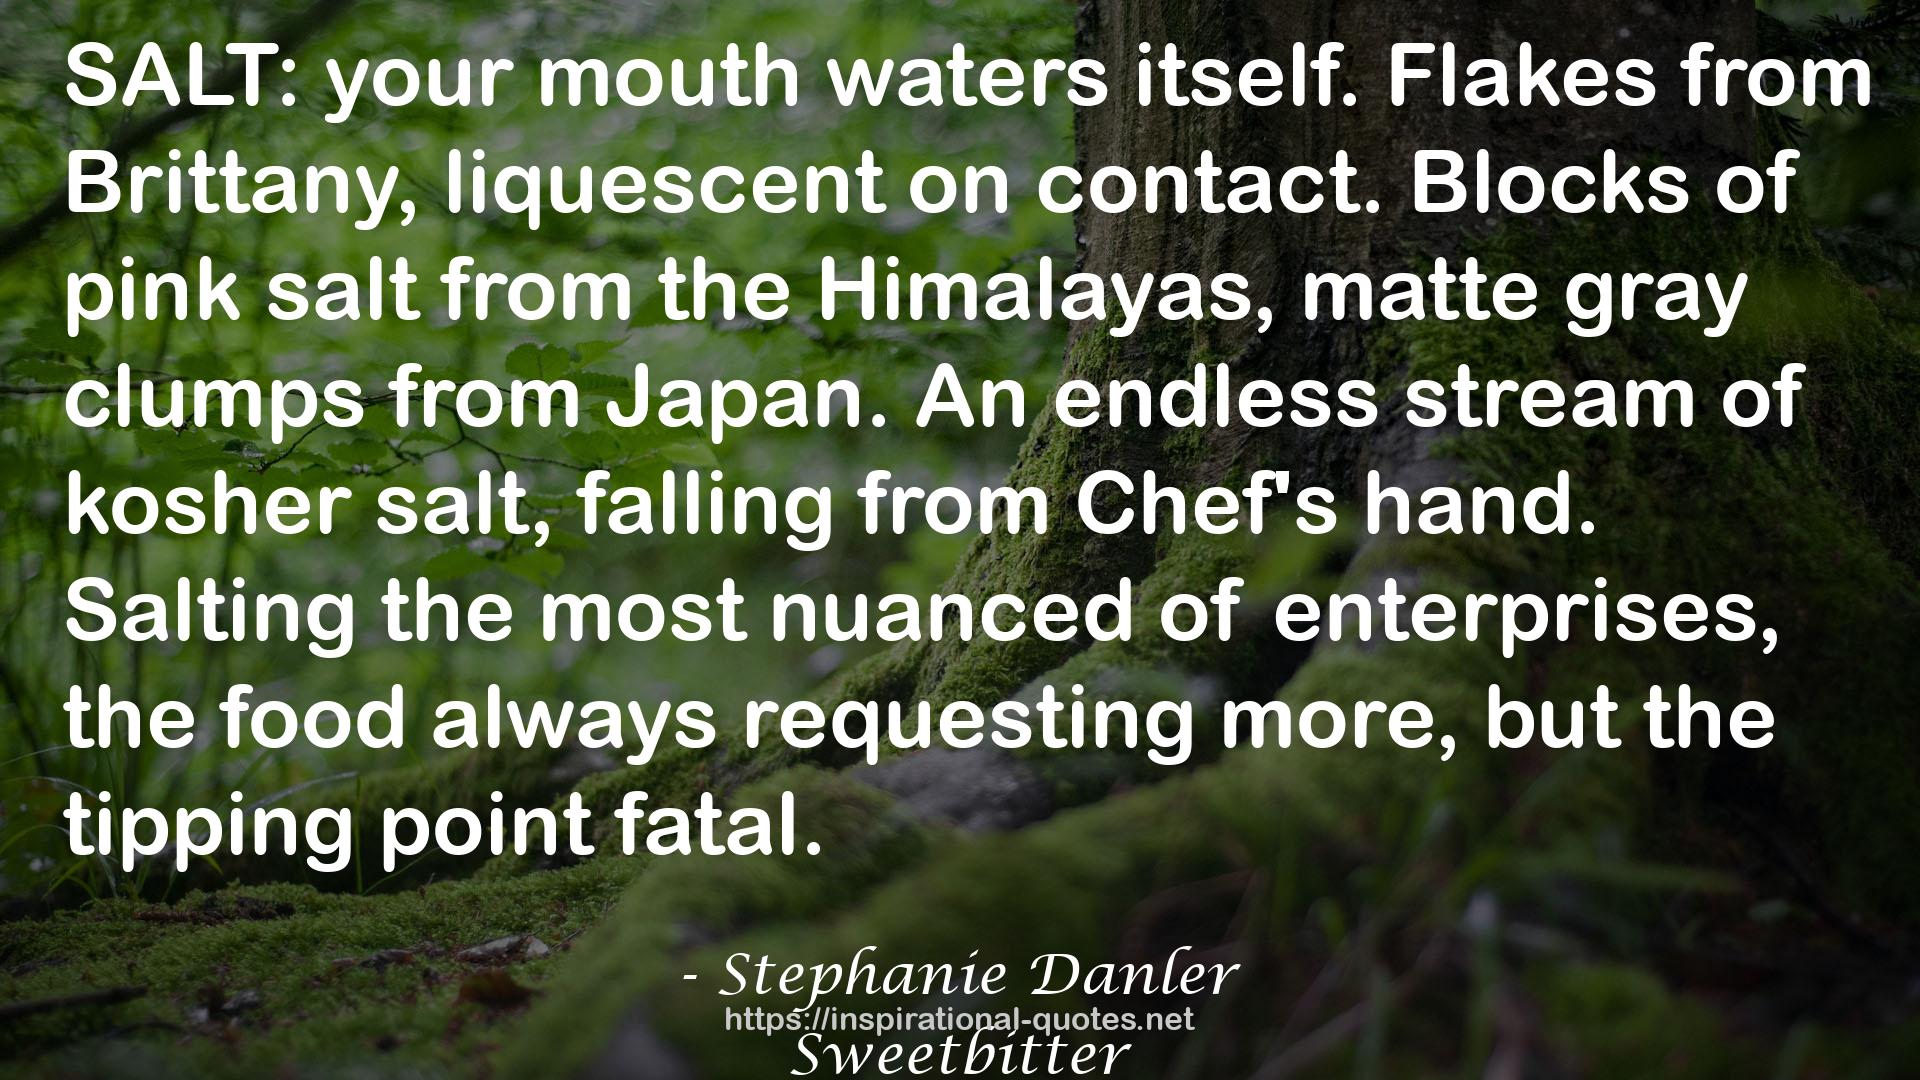 Stephanie Danler QUOTES